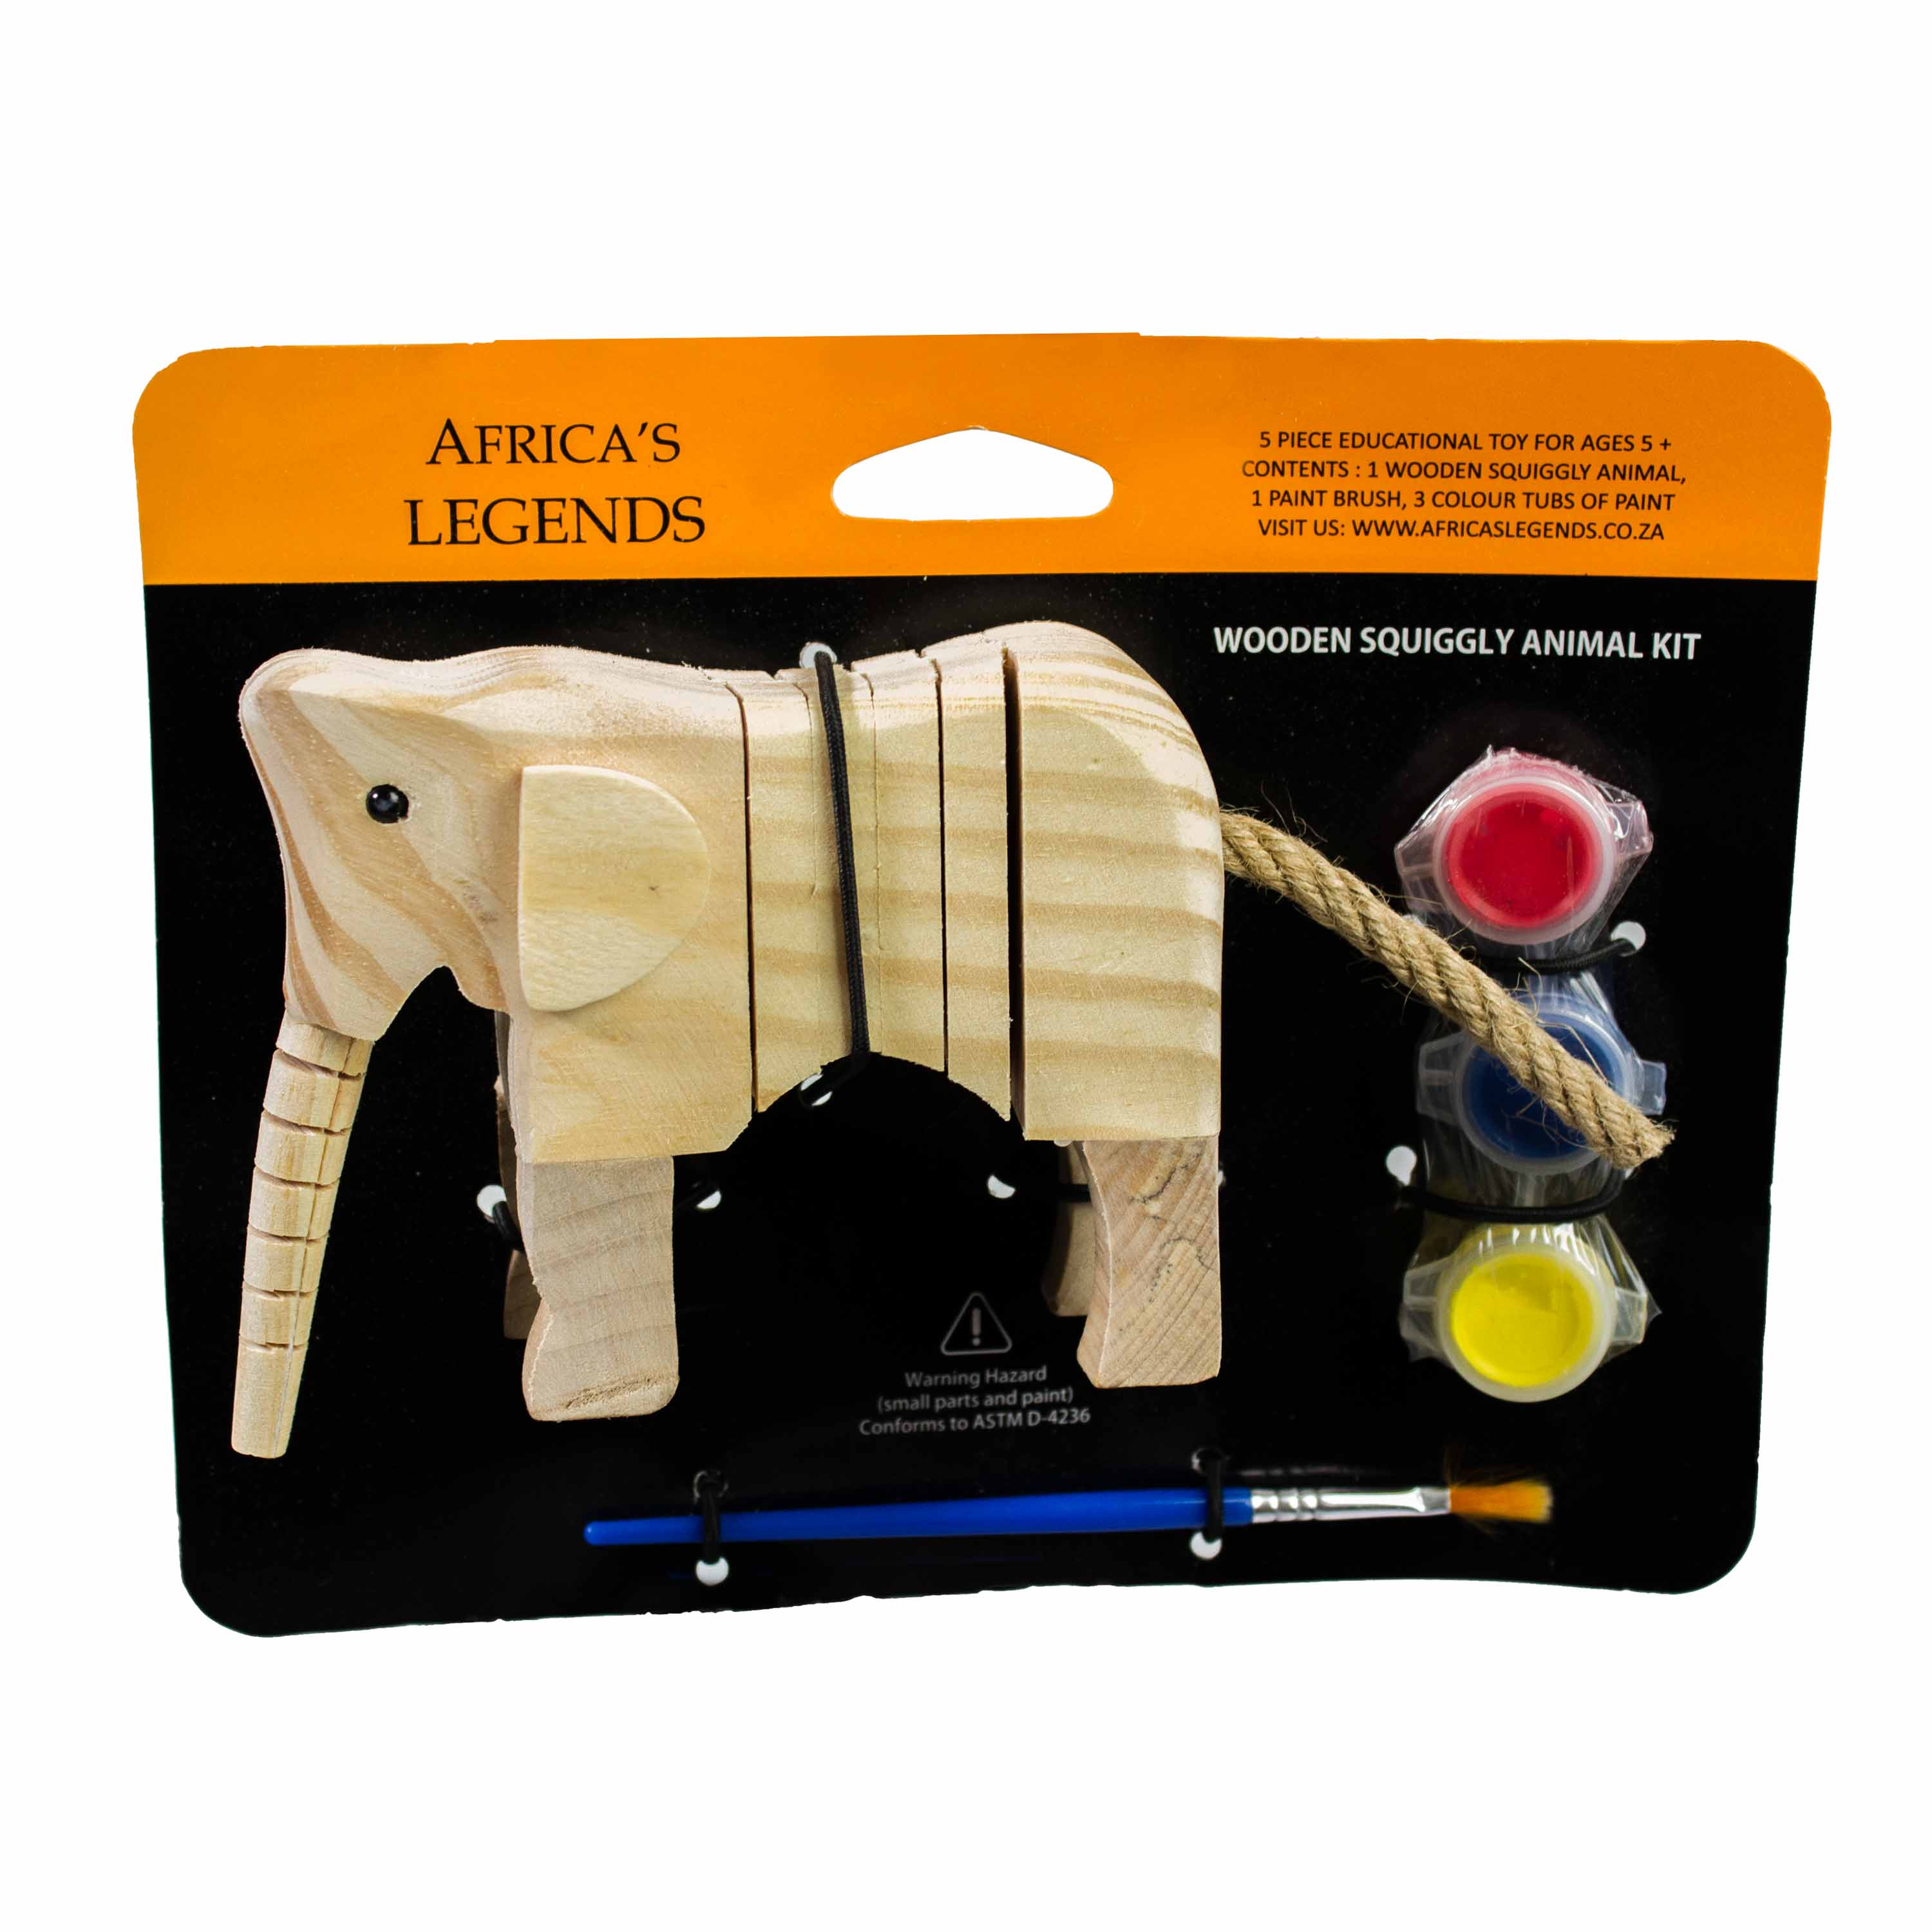 Wooden Squiggly Animal Kits